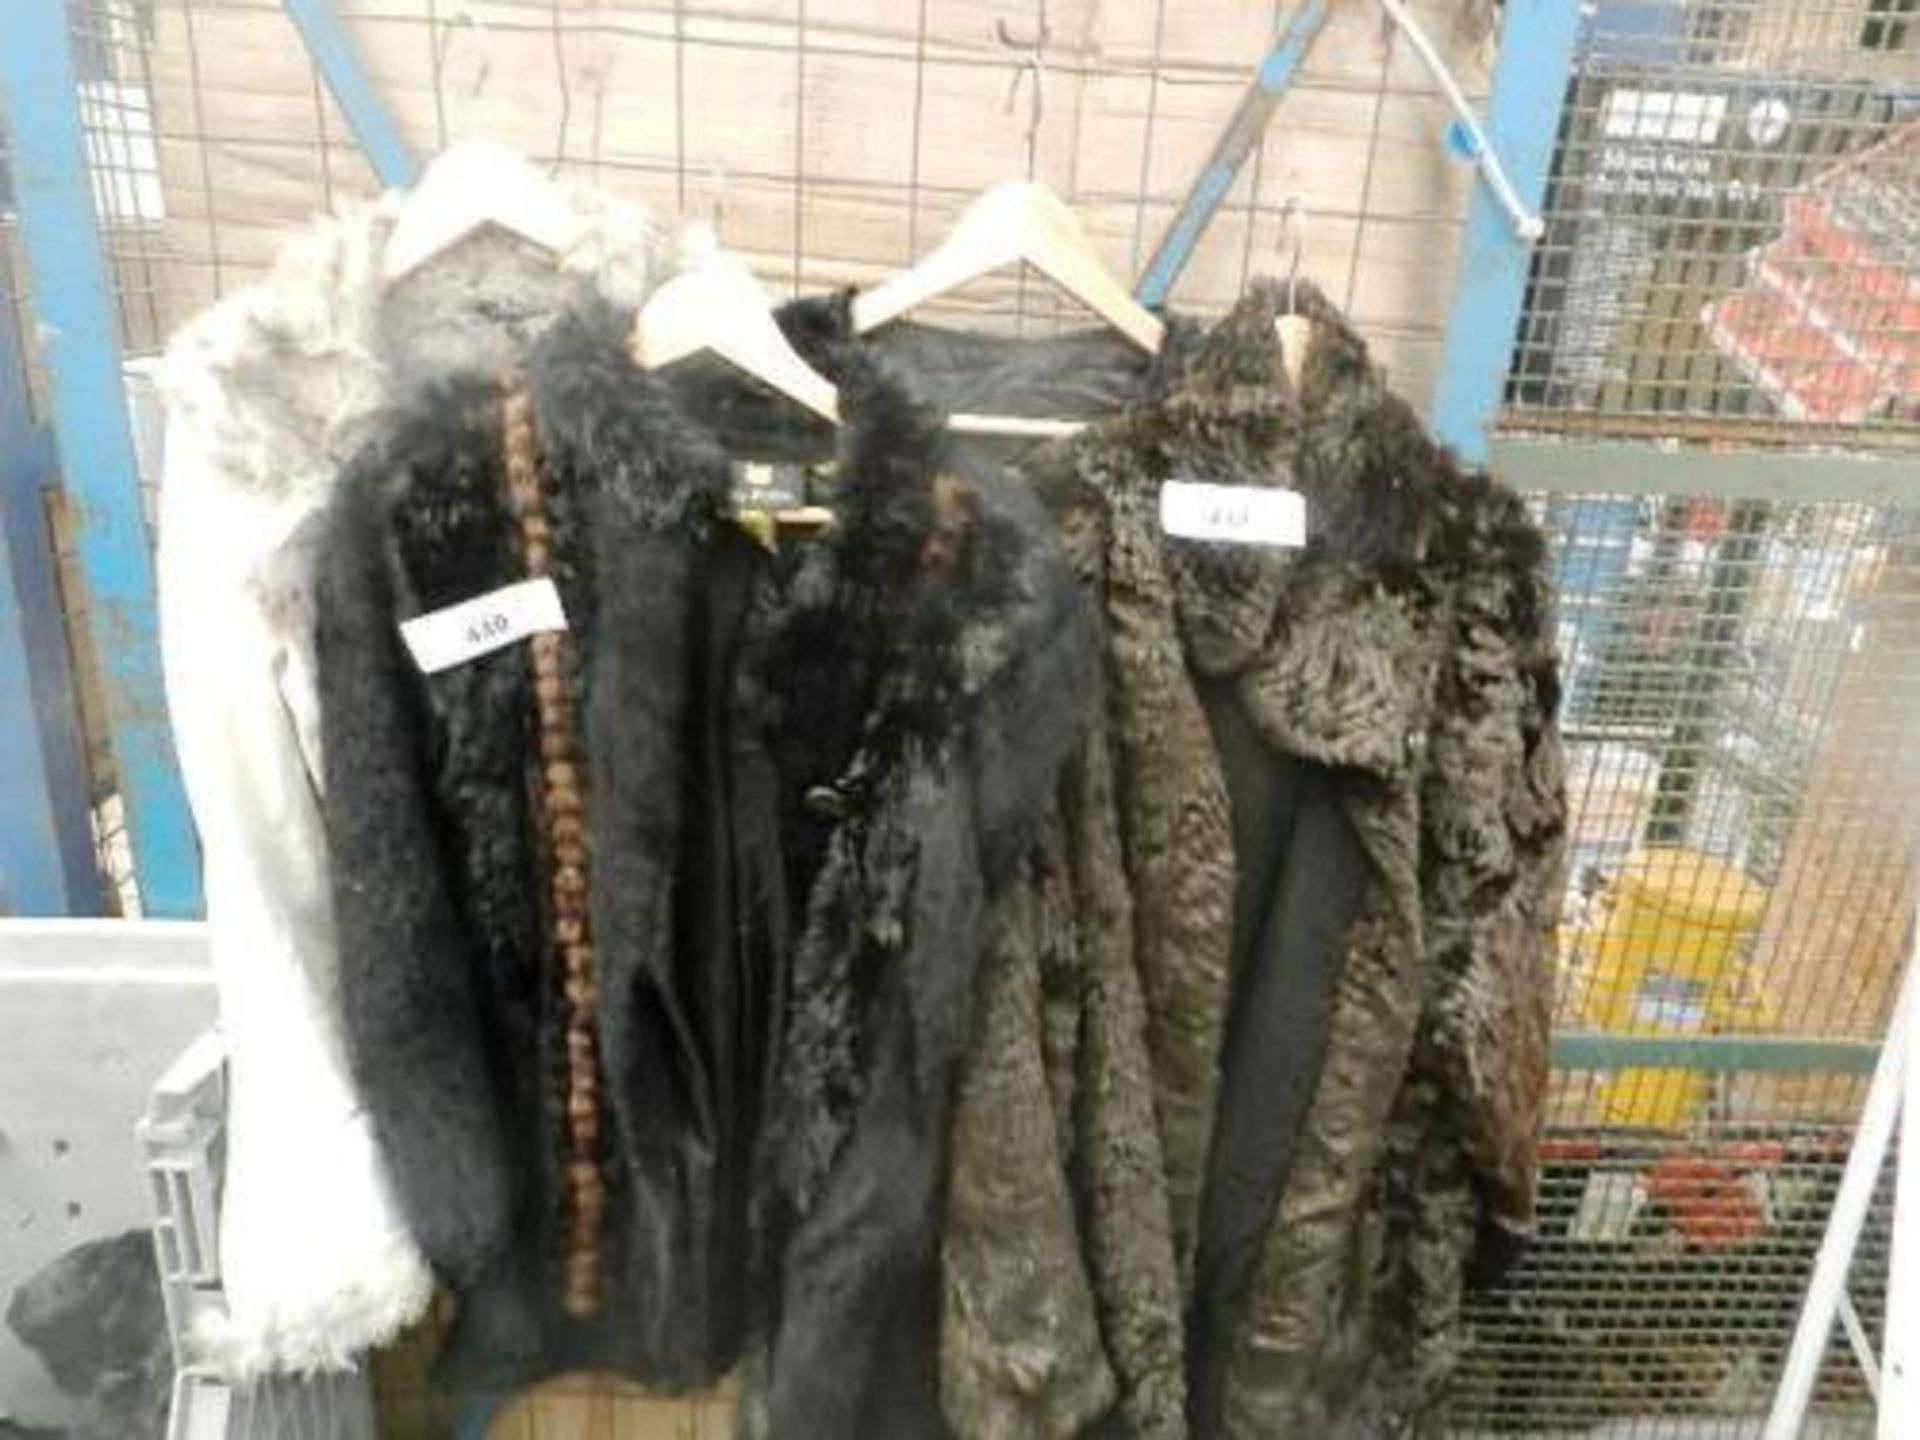 4 x fur jackets, size unknown approximately 12 - 14, includes Angora jacket by Fully Fashion, - Image 2 of 2